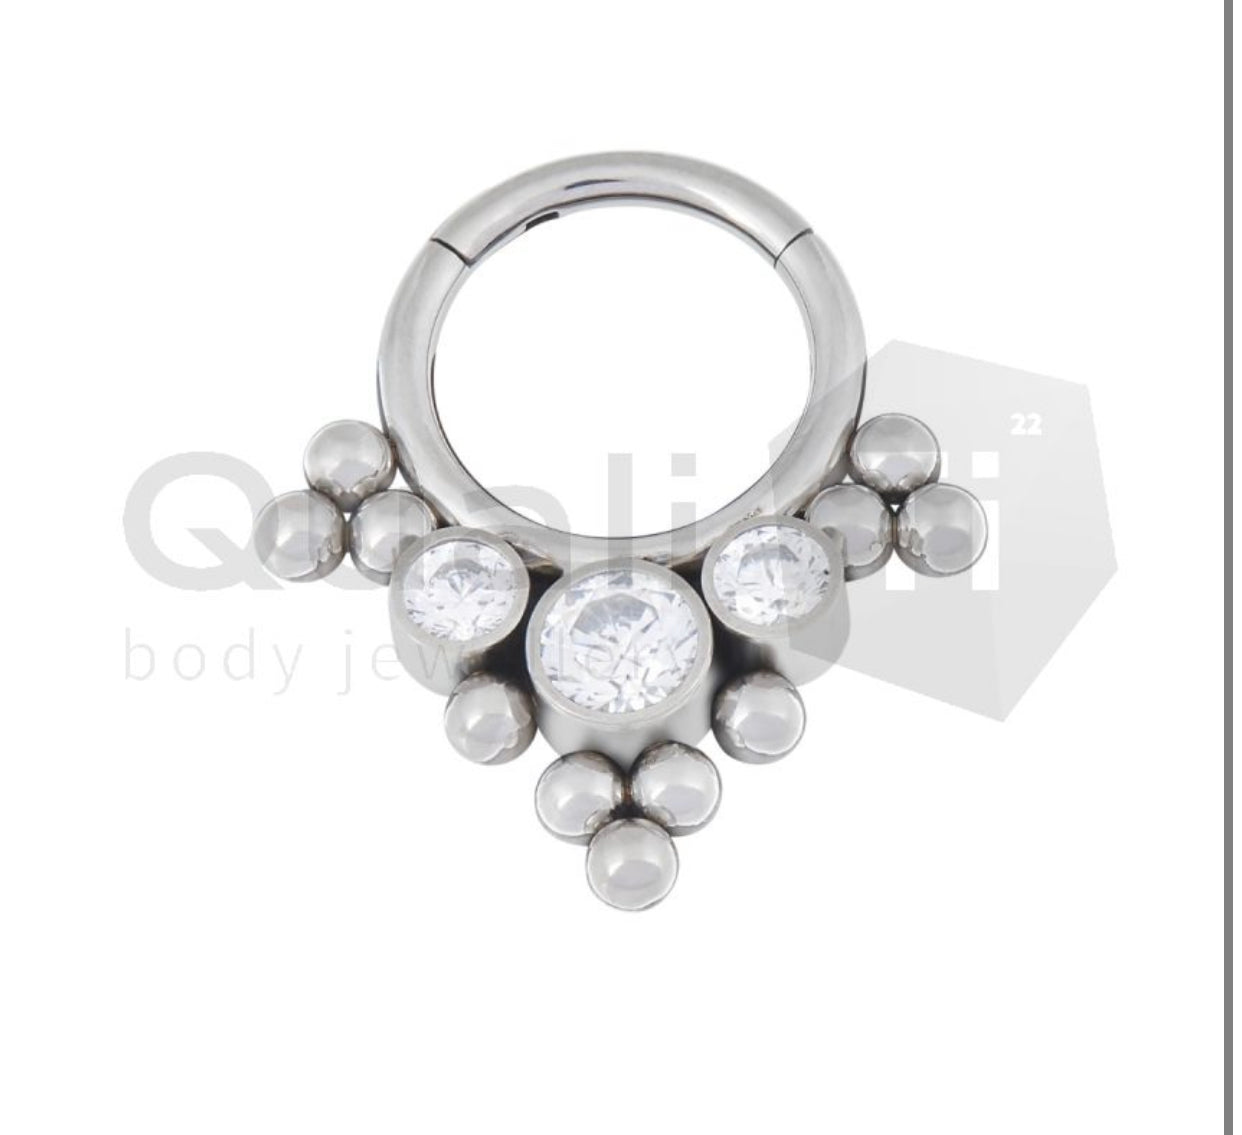 The 'Crystelle' Tri Hinged Ring